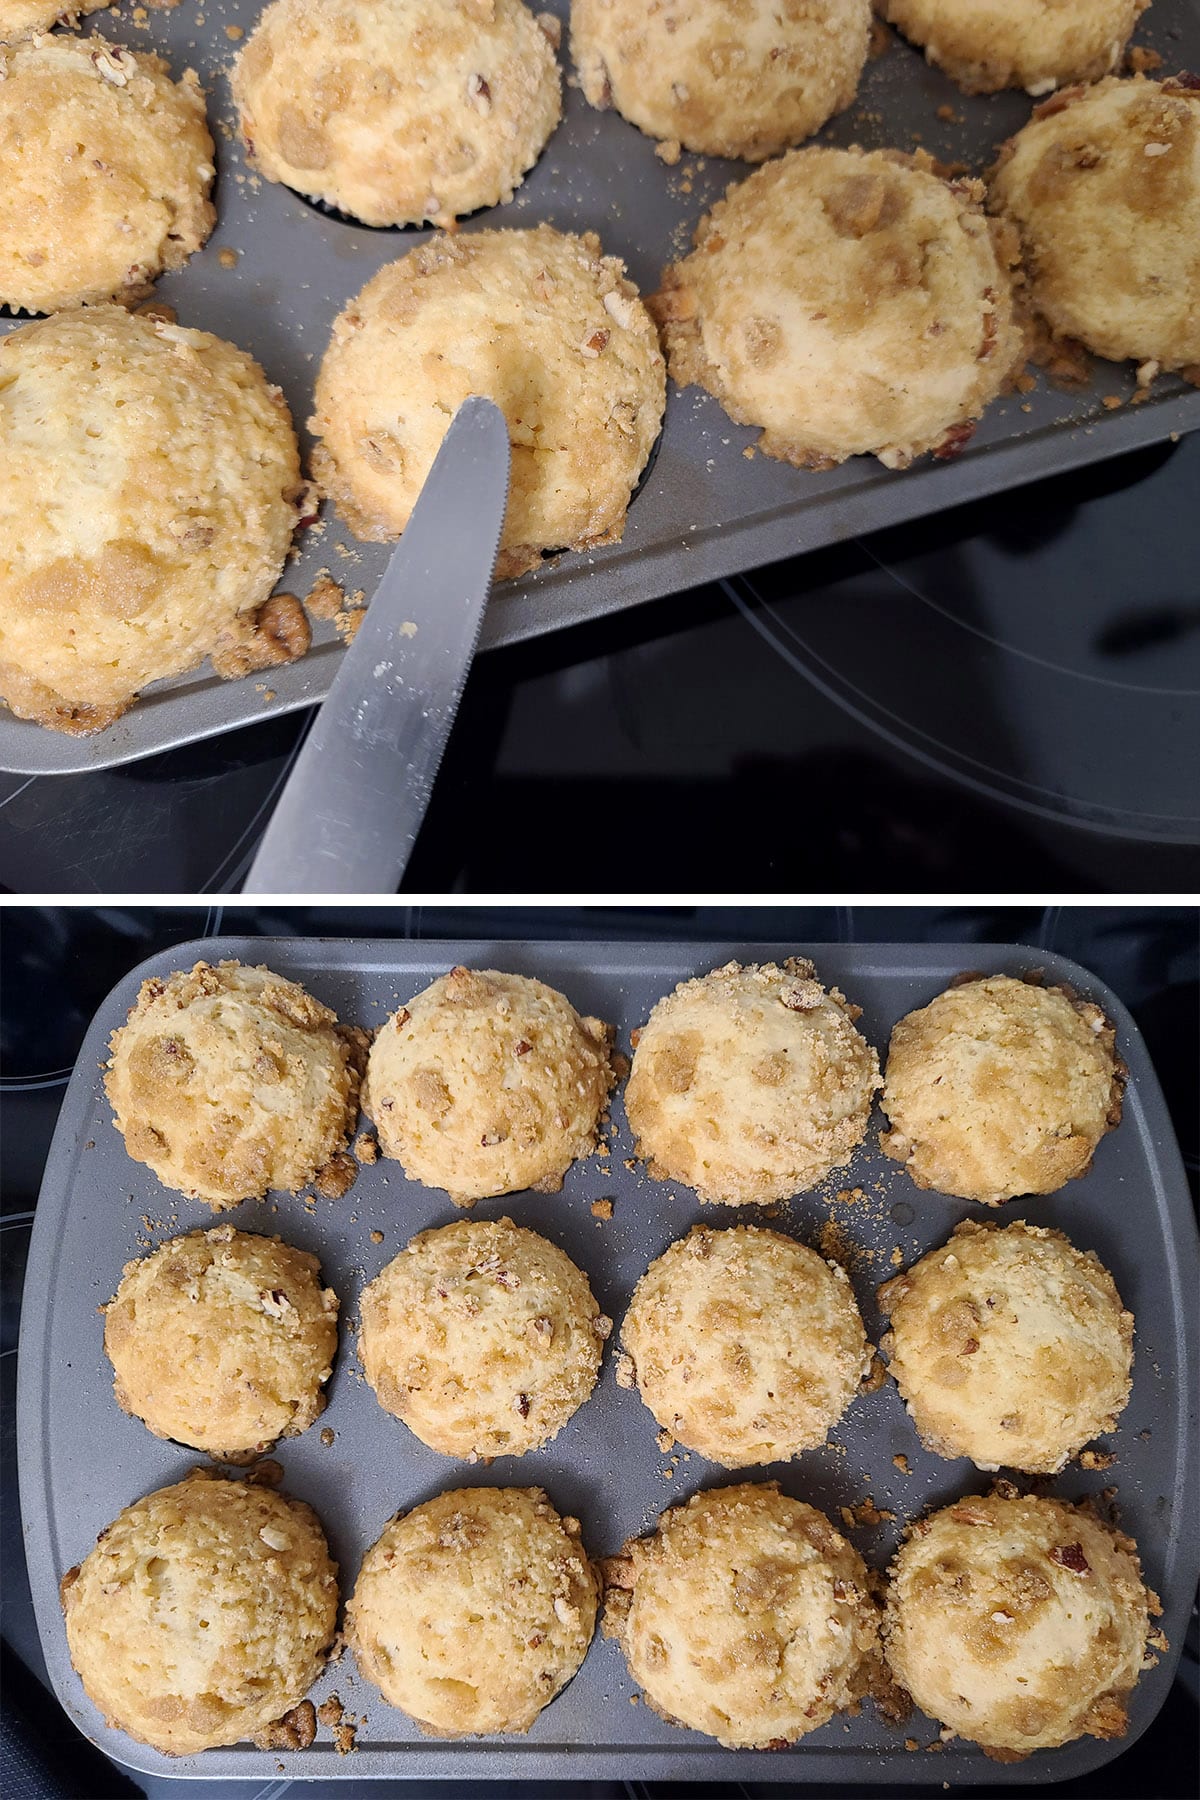 A 2 part image showing a clean butter knife being held above the muffins, and the whole pan of baked muffins.